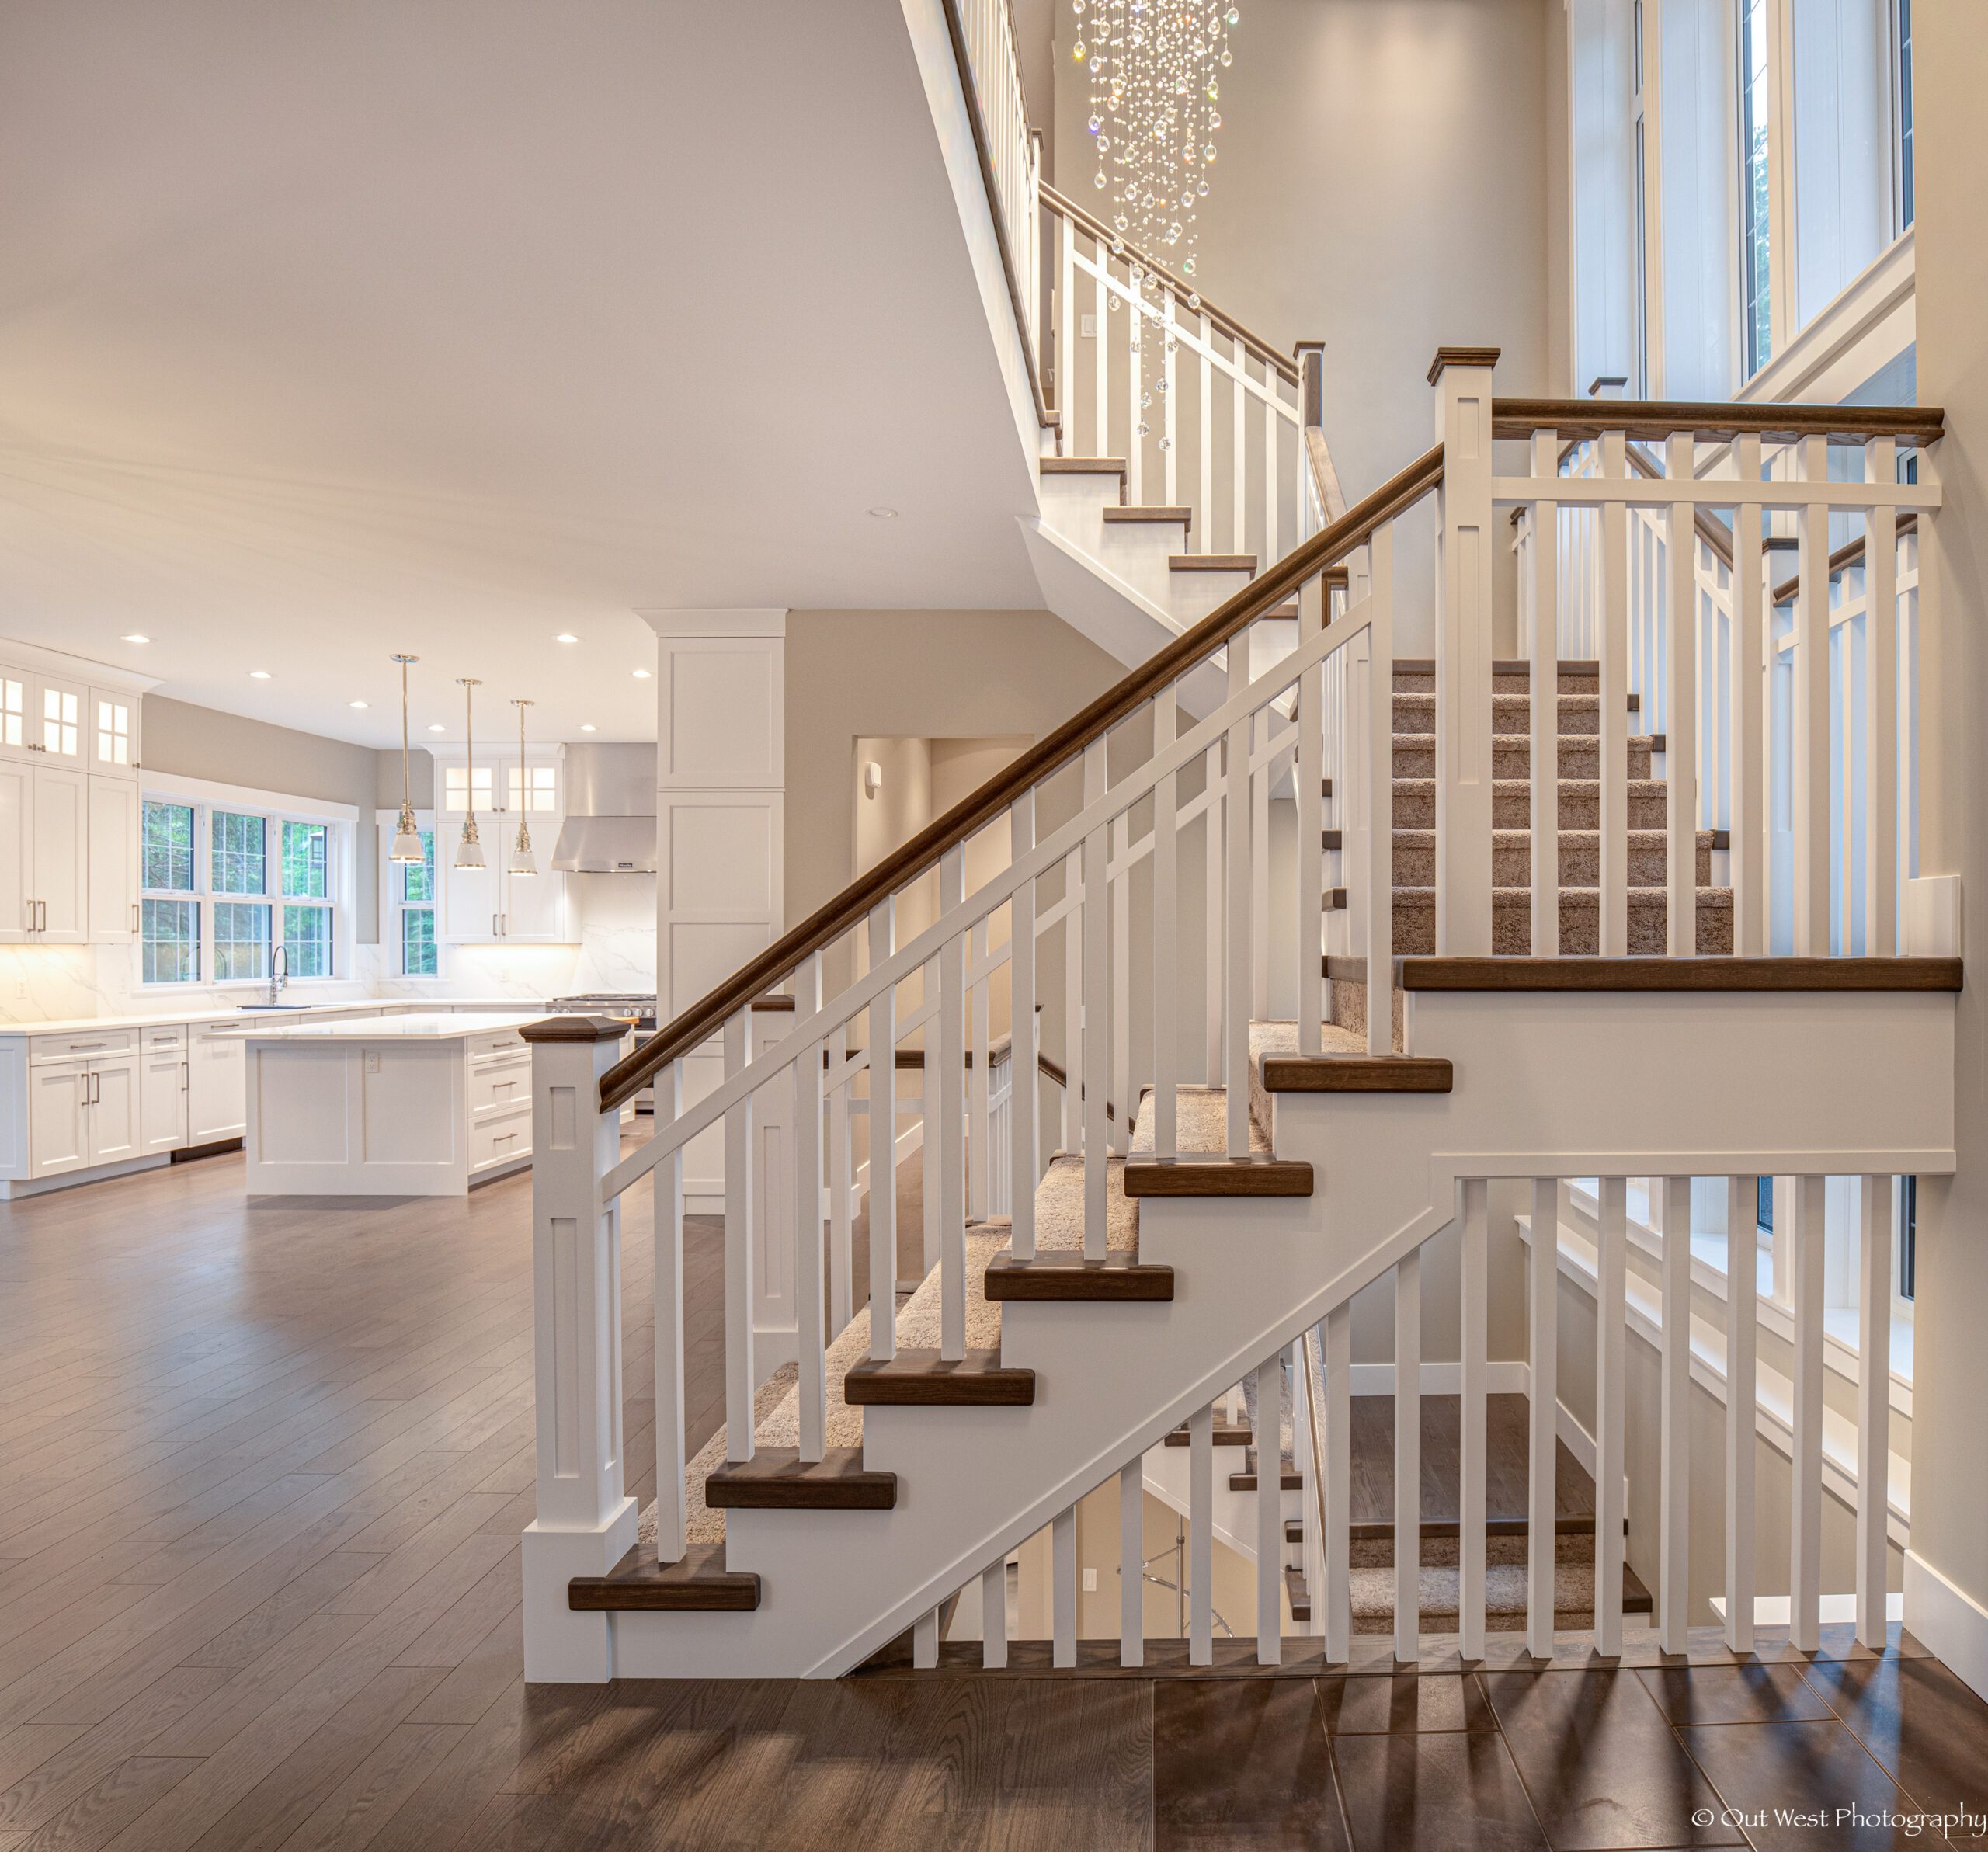 Custom made luxury staircase image by Out West Photography.